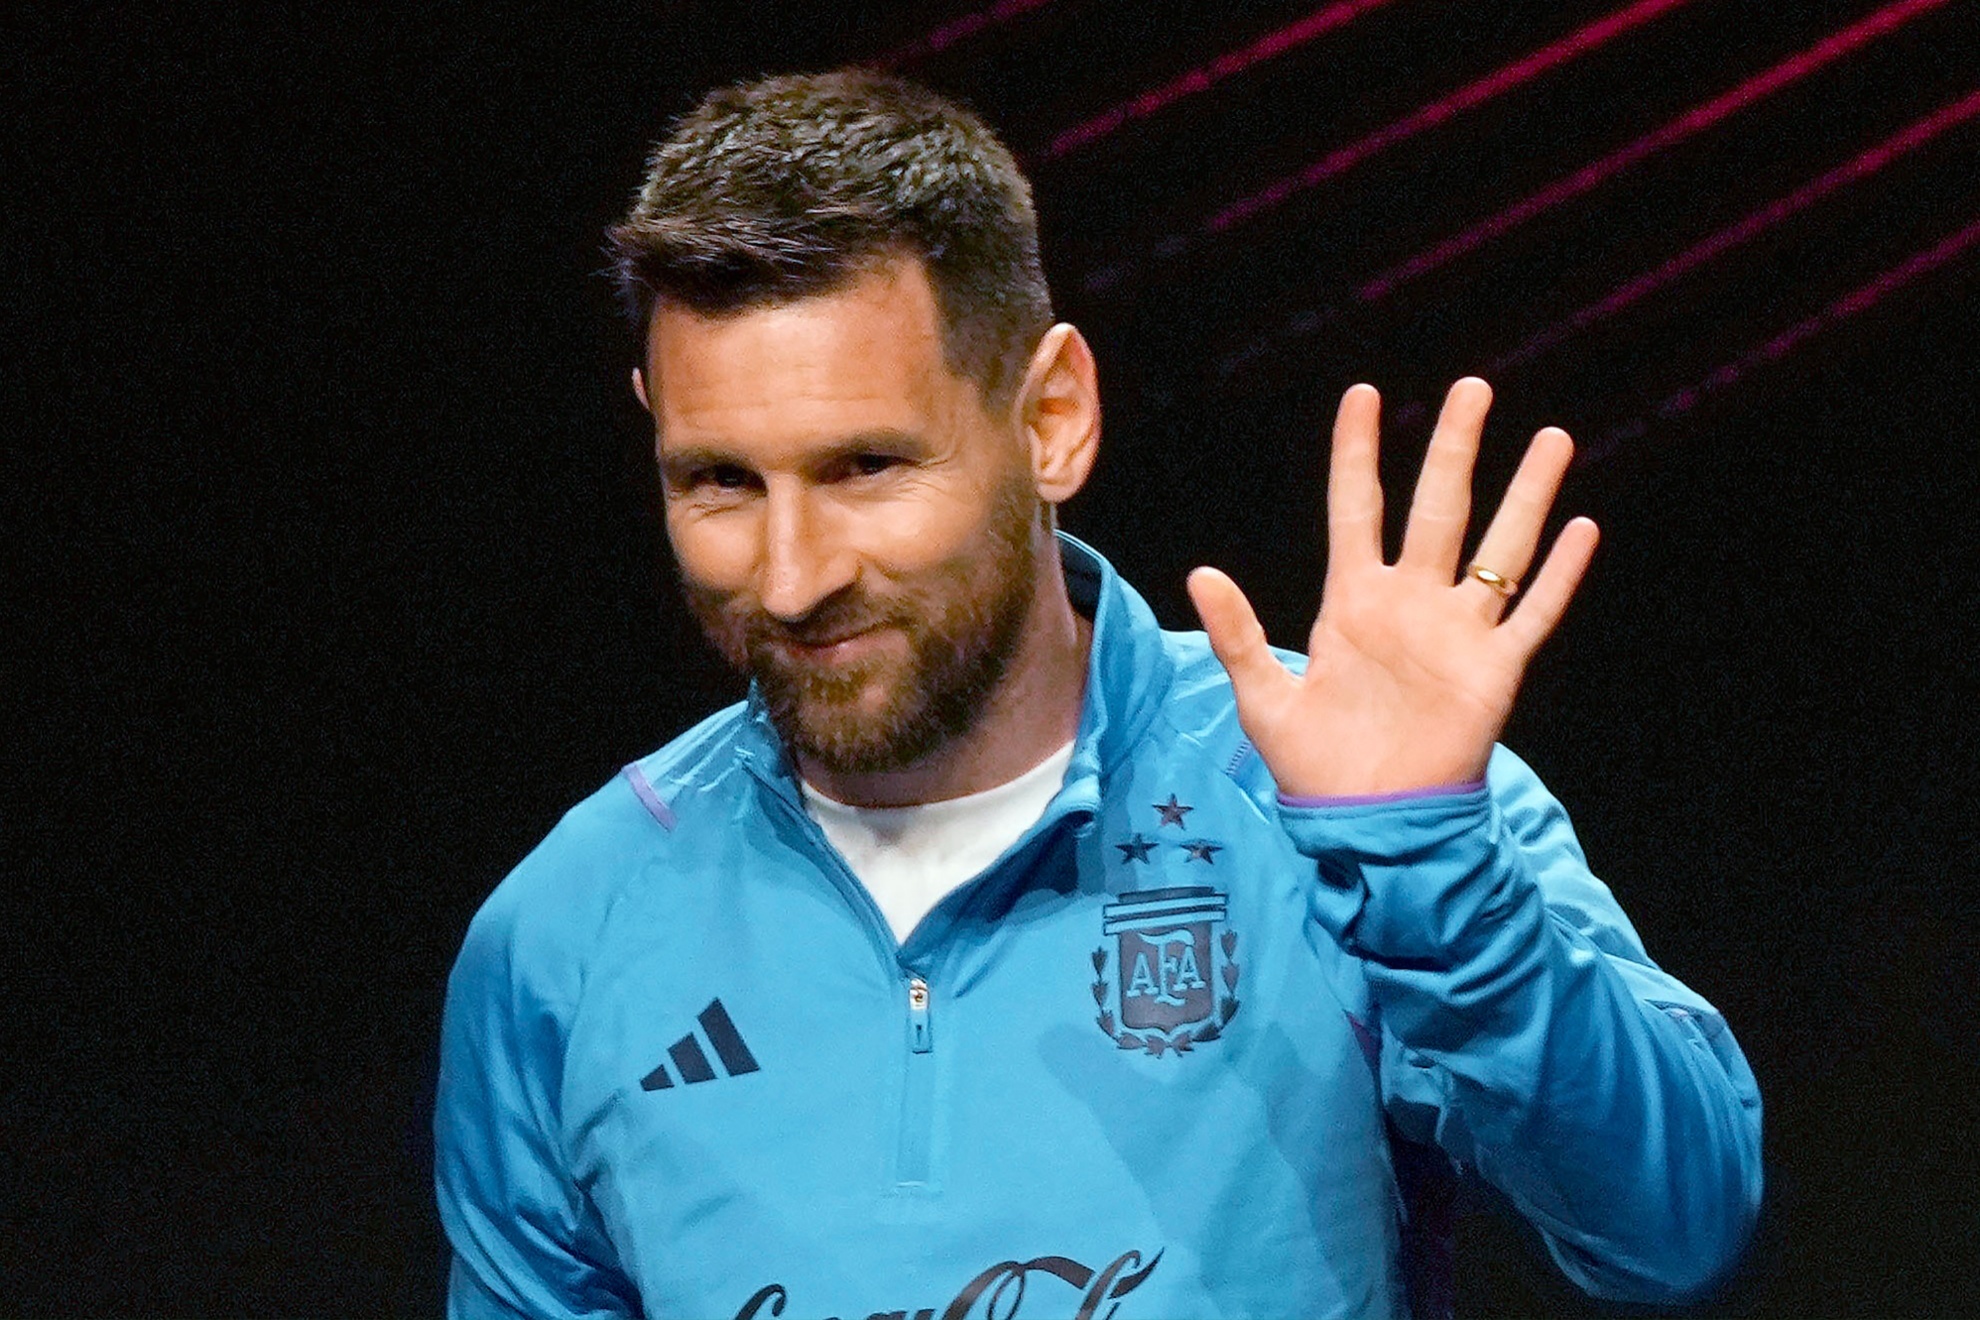 Inter Miami will make Messi the 5th highest-paid athlete per year in the U.S.